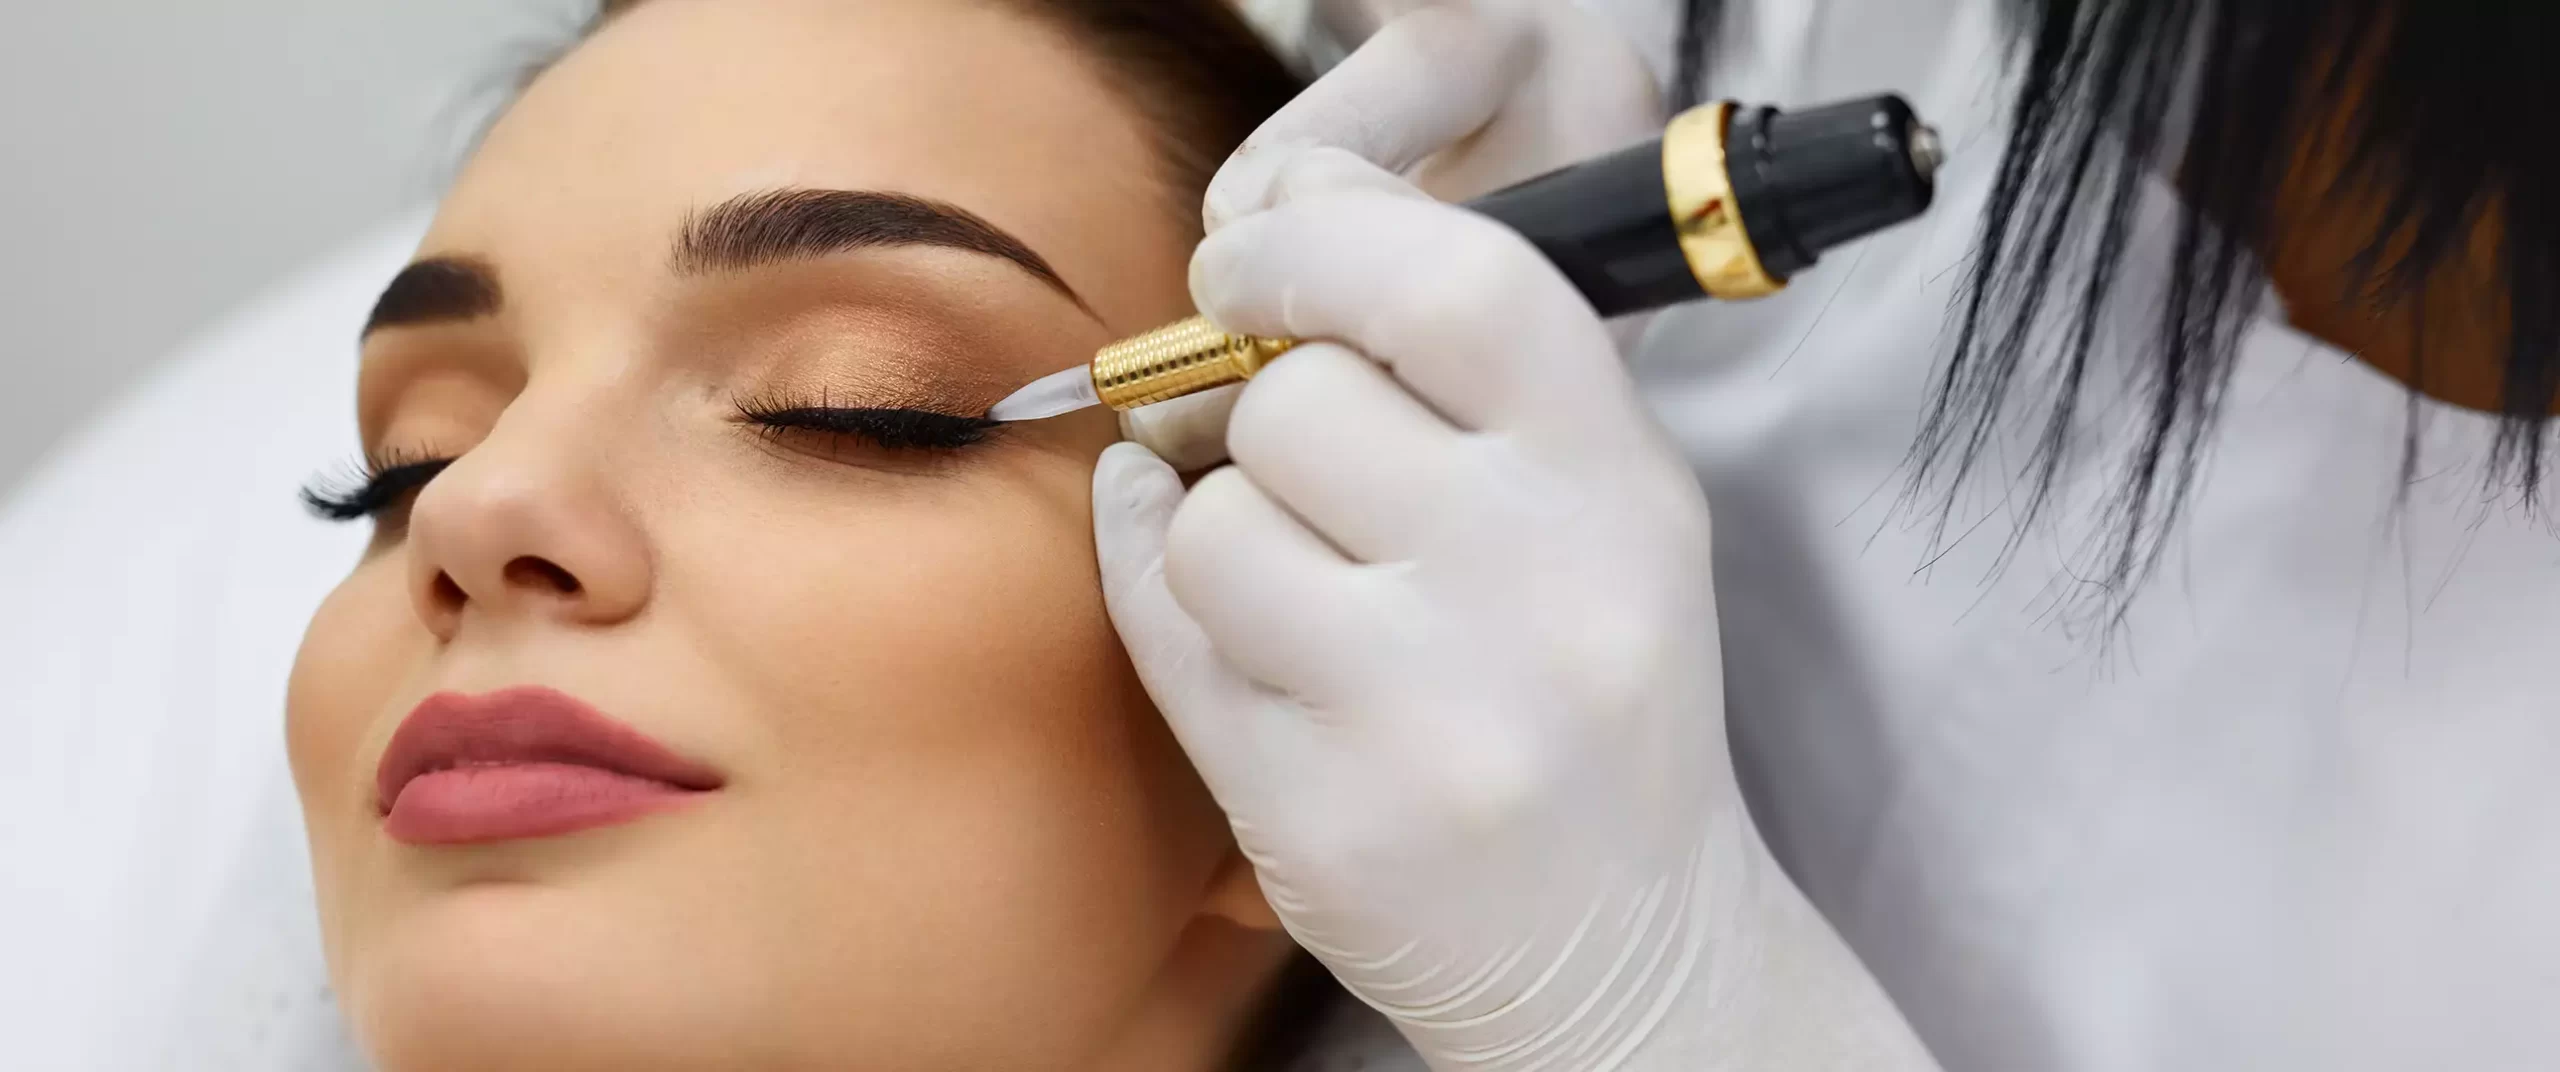 permanent microblading makup services